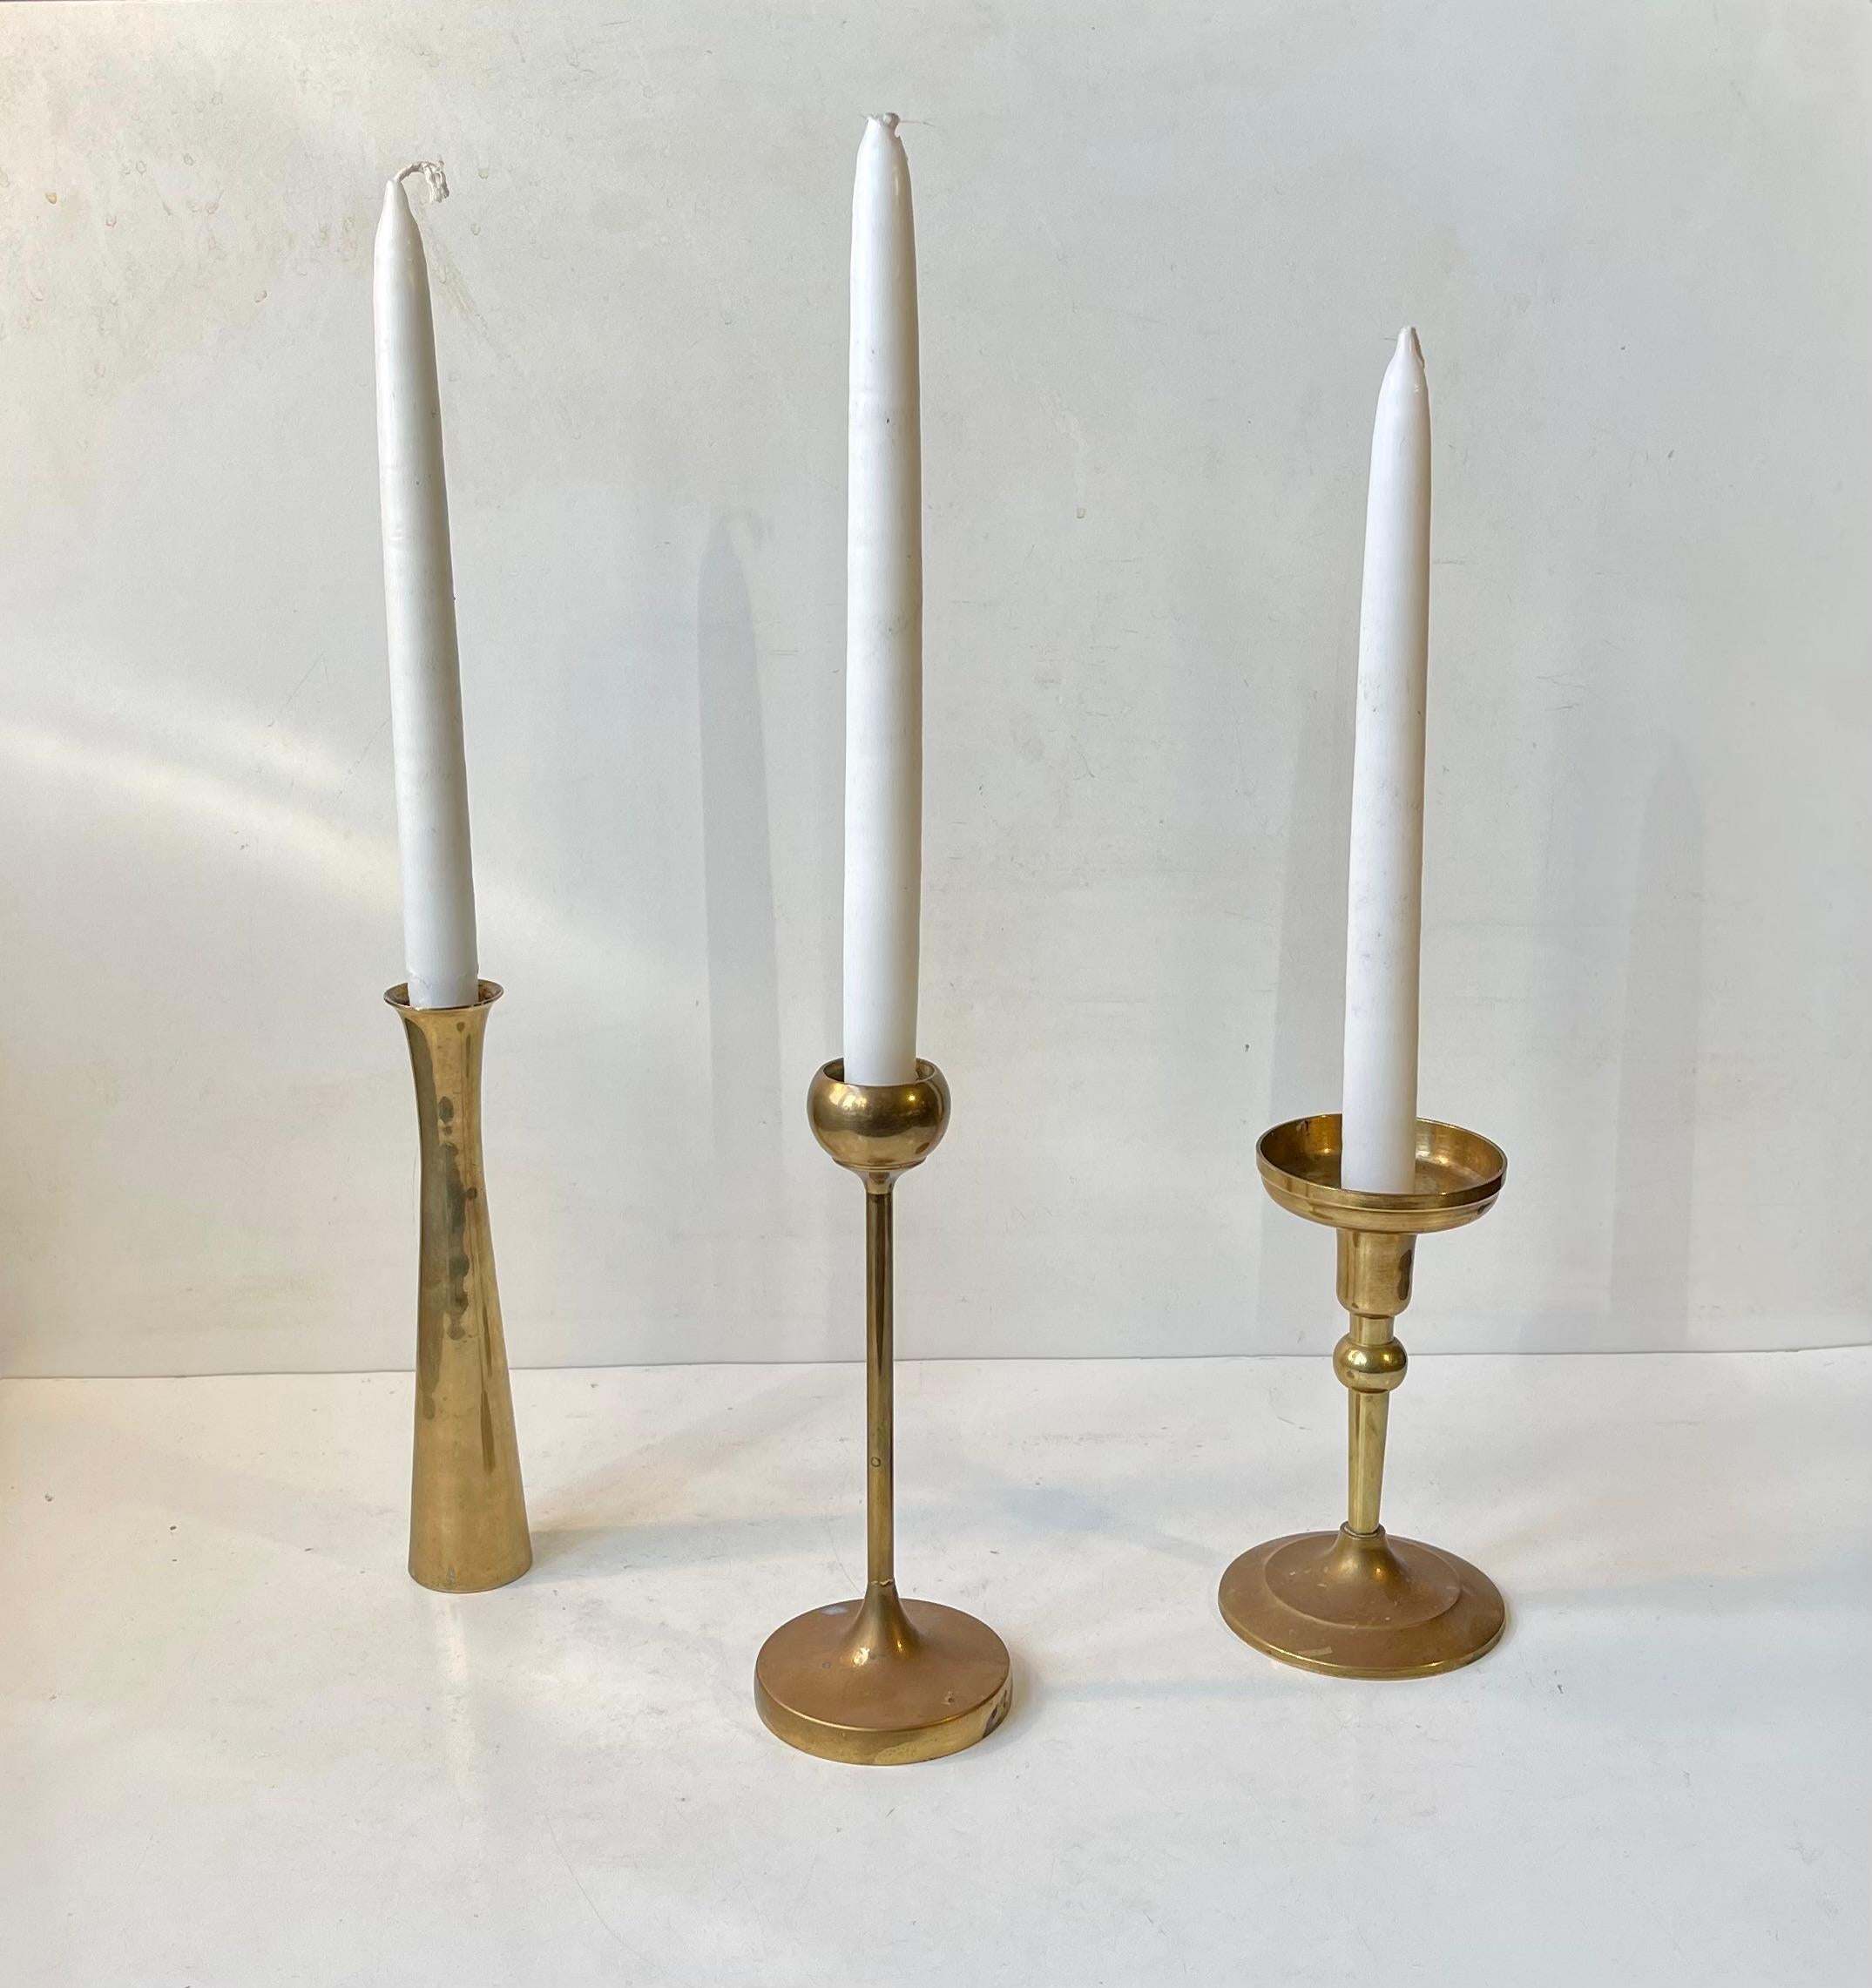 A trio of solid brass candlesticks manufactured in Denmark during the 1970s. The candlesticks are to be fitted with regular sixed candles. They have not been polished recently and display patina. The style of this set is reminiscent of Quistgaard,